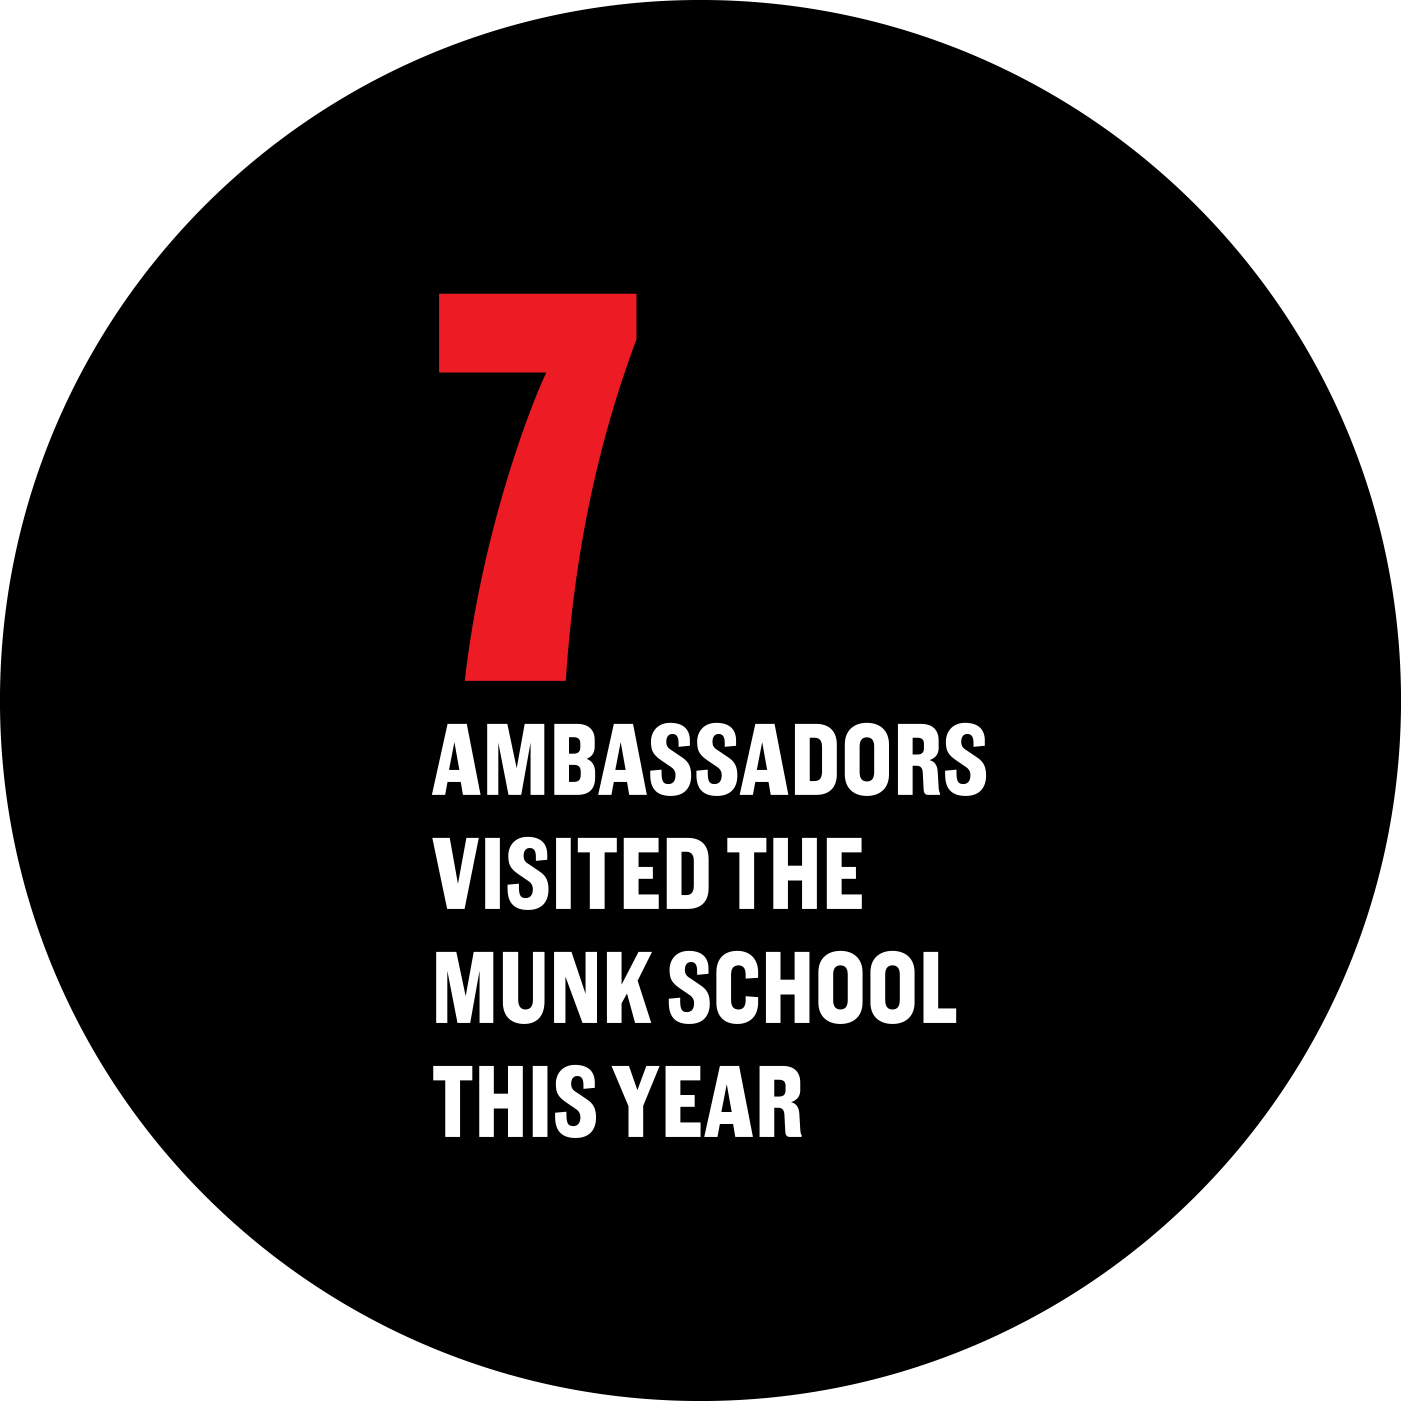 7 Ambassadors visited the Munk School this year